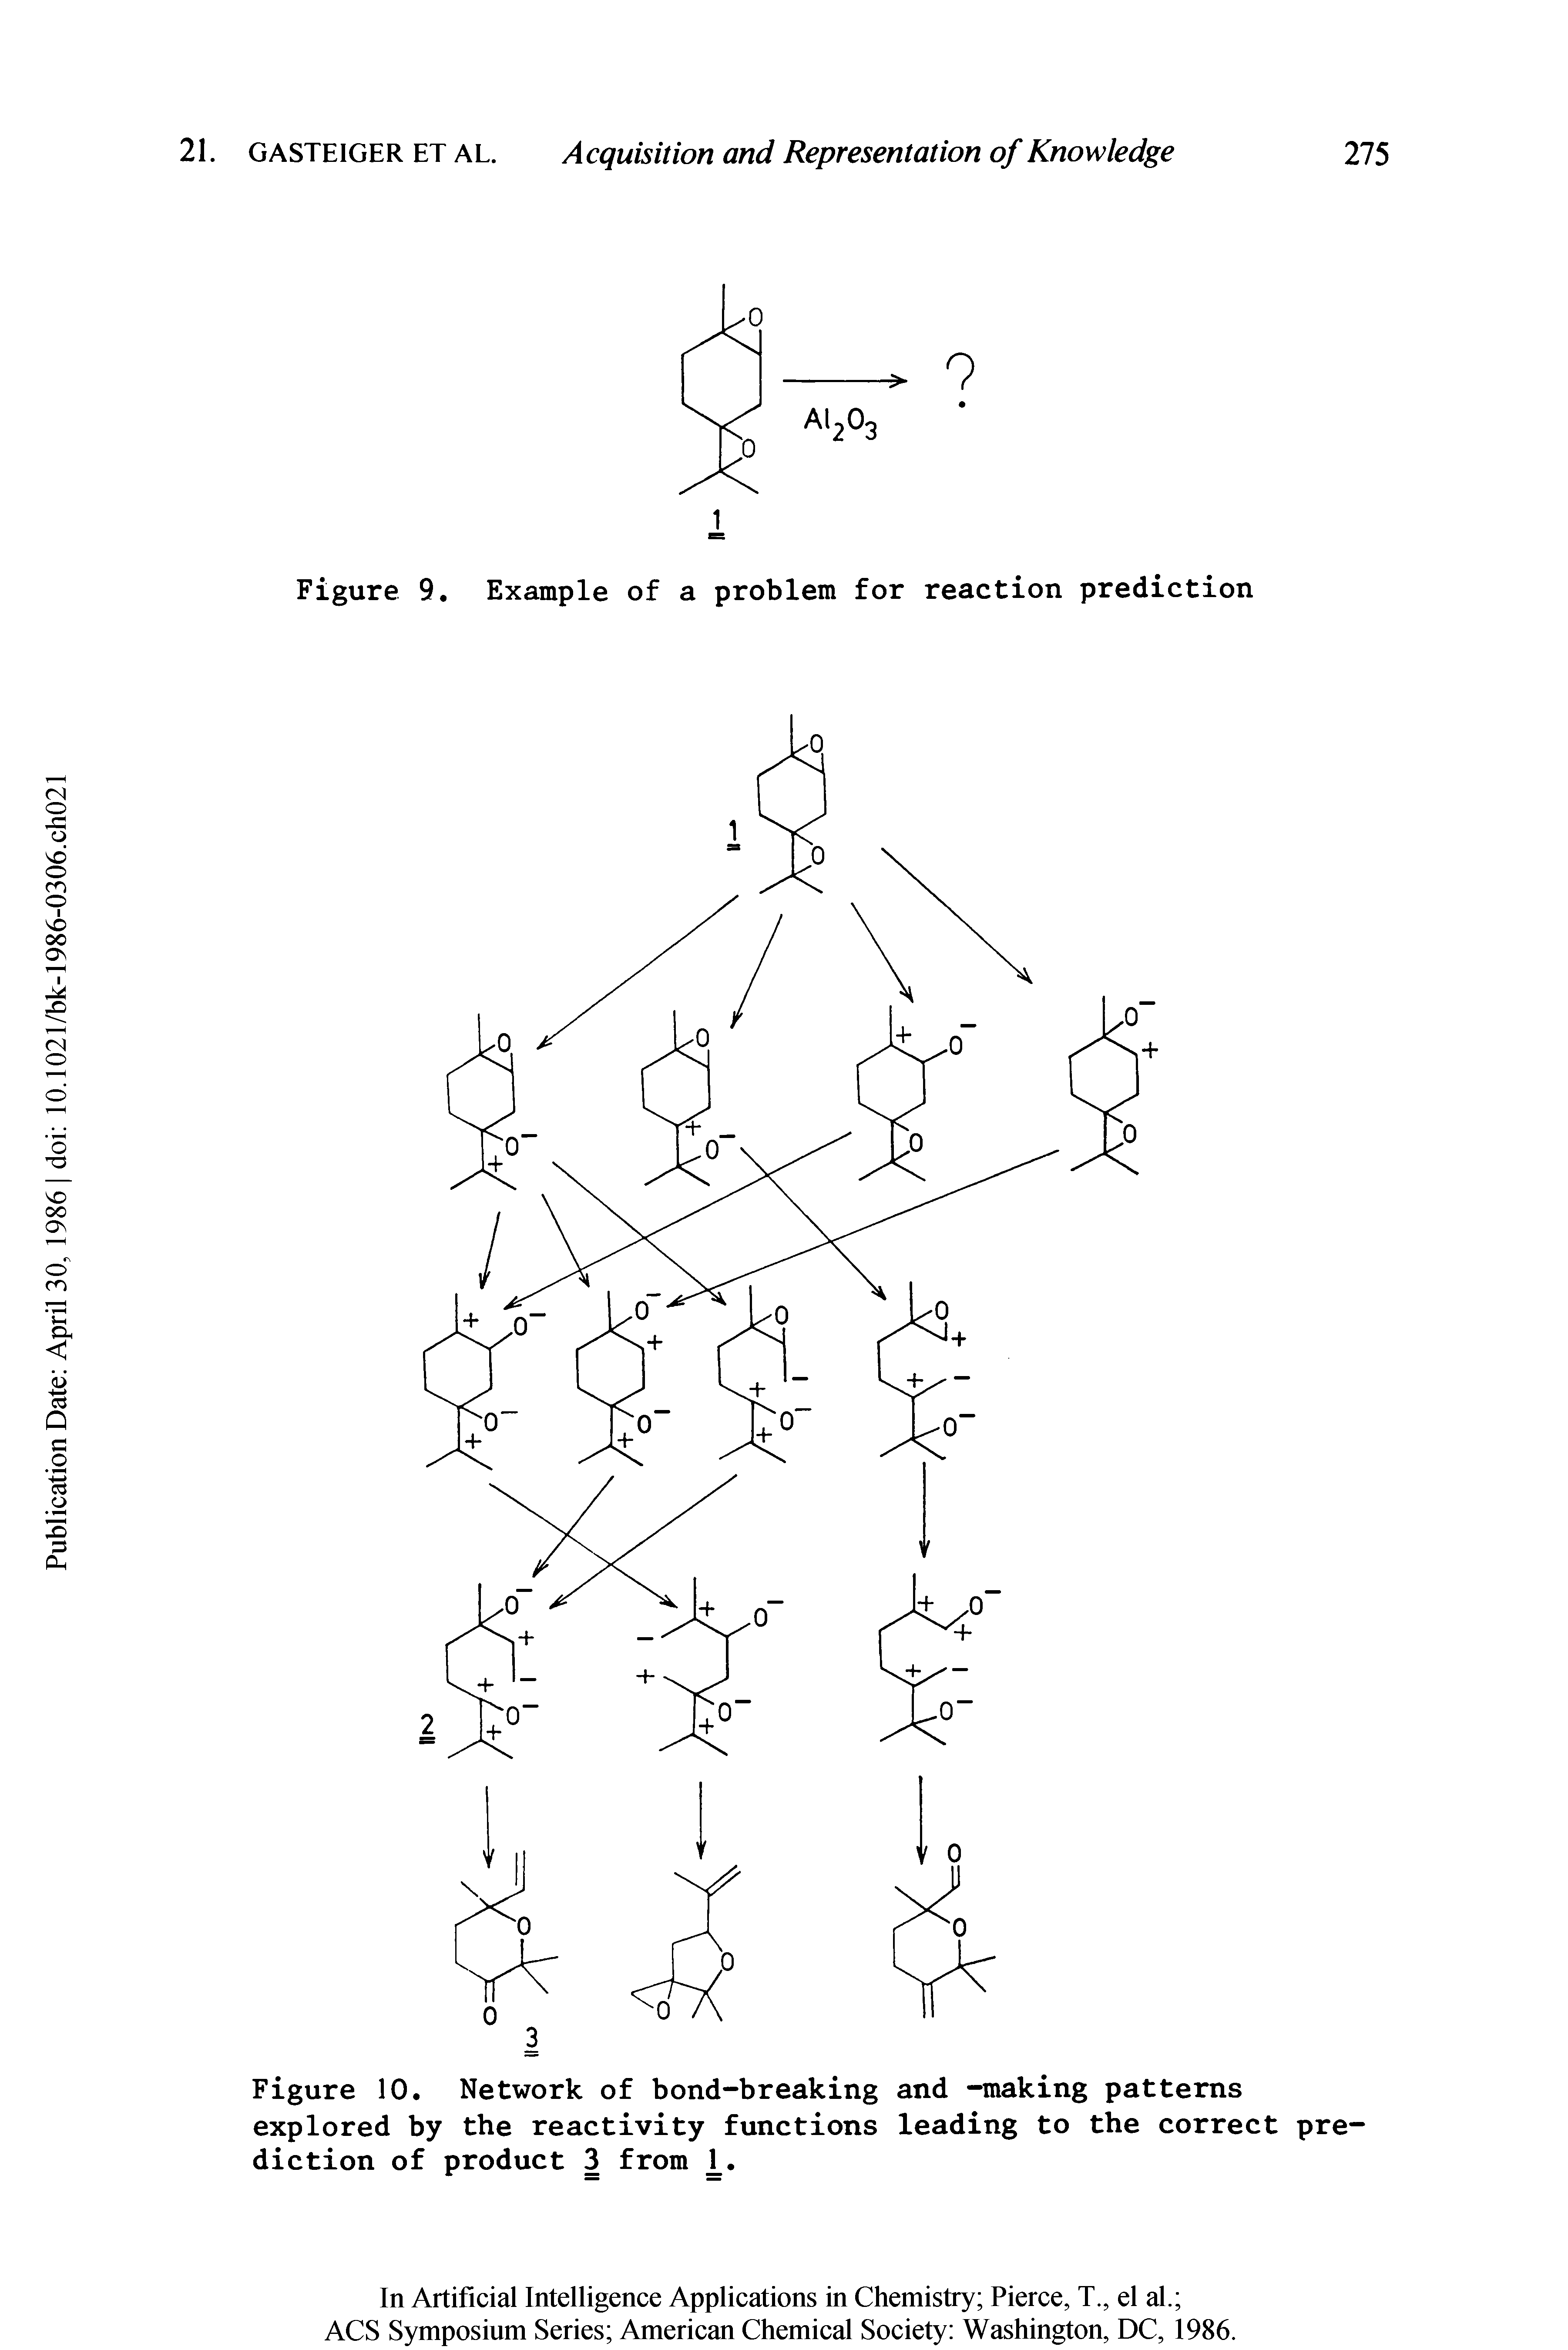 Figure 10. Network of bond-breaking and -making patterns explored by the reactivity functions leading to the correct prediction of product 3 from...